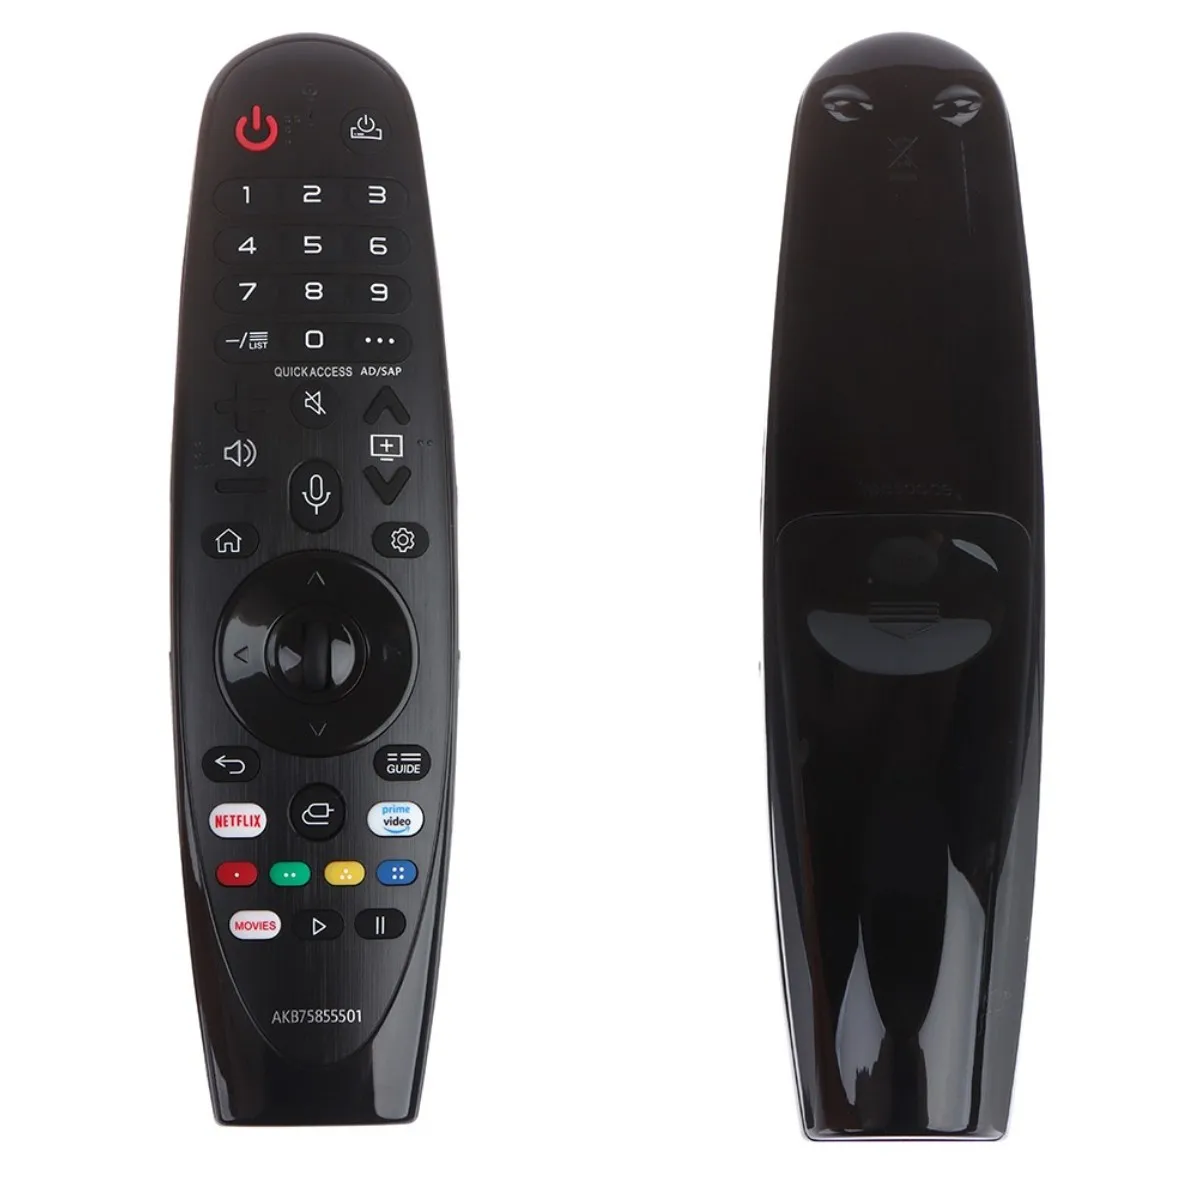 

AKB75855501 MR20GA Remote Control Infrared Replacement Remote Commander Fit For LG Smart TV